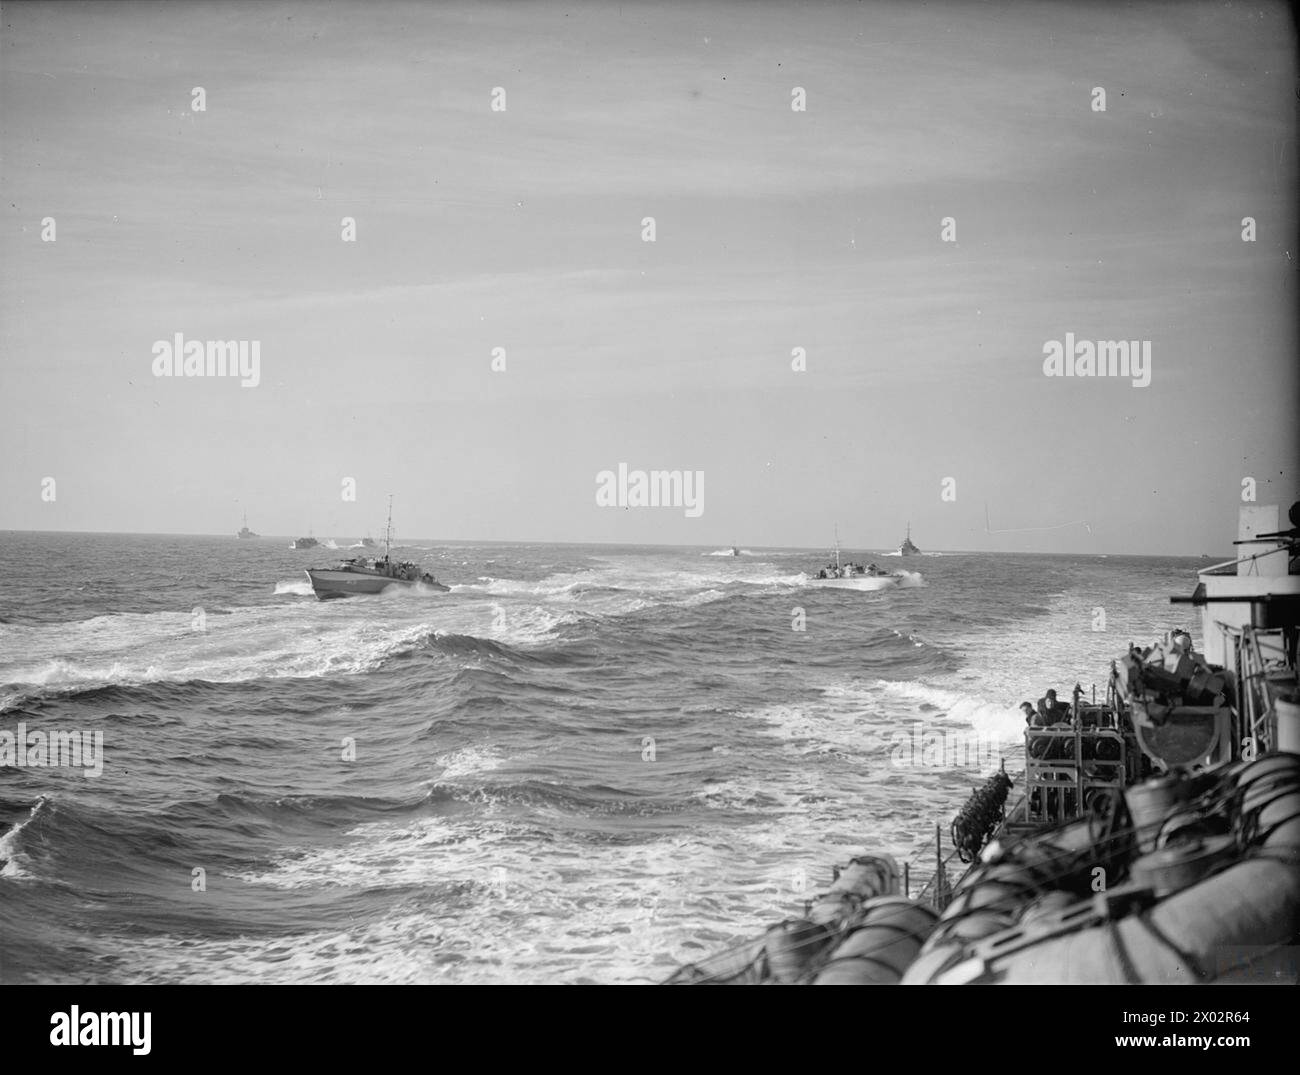 LIBERATION OF EUROPE: MOTOR TORPEDO BOATS AND THEIR COMMANDERS WHO PATROL 'INVASION BAY'. 11 AND 12 JUNE 1944, ON BOARD THE CAPTAIN CLASS FRIGATE HMS STAYNER, CONTROL SHIP TO LIGHT COASTAL FORCES. - Motor torpedo boats returning after dawn from an anti-E-boat patrol off Cherbourg Stock Photo